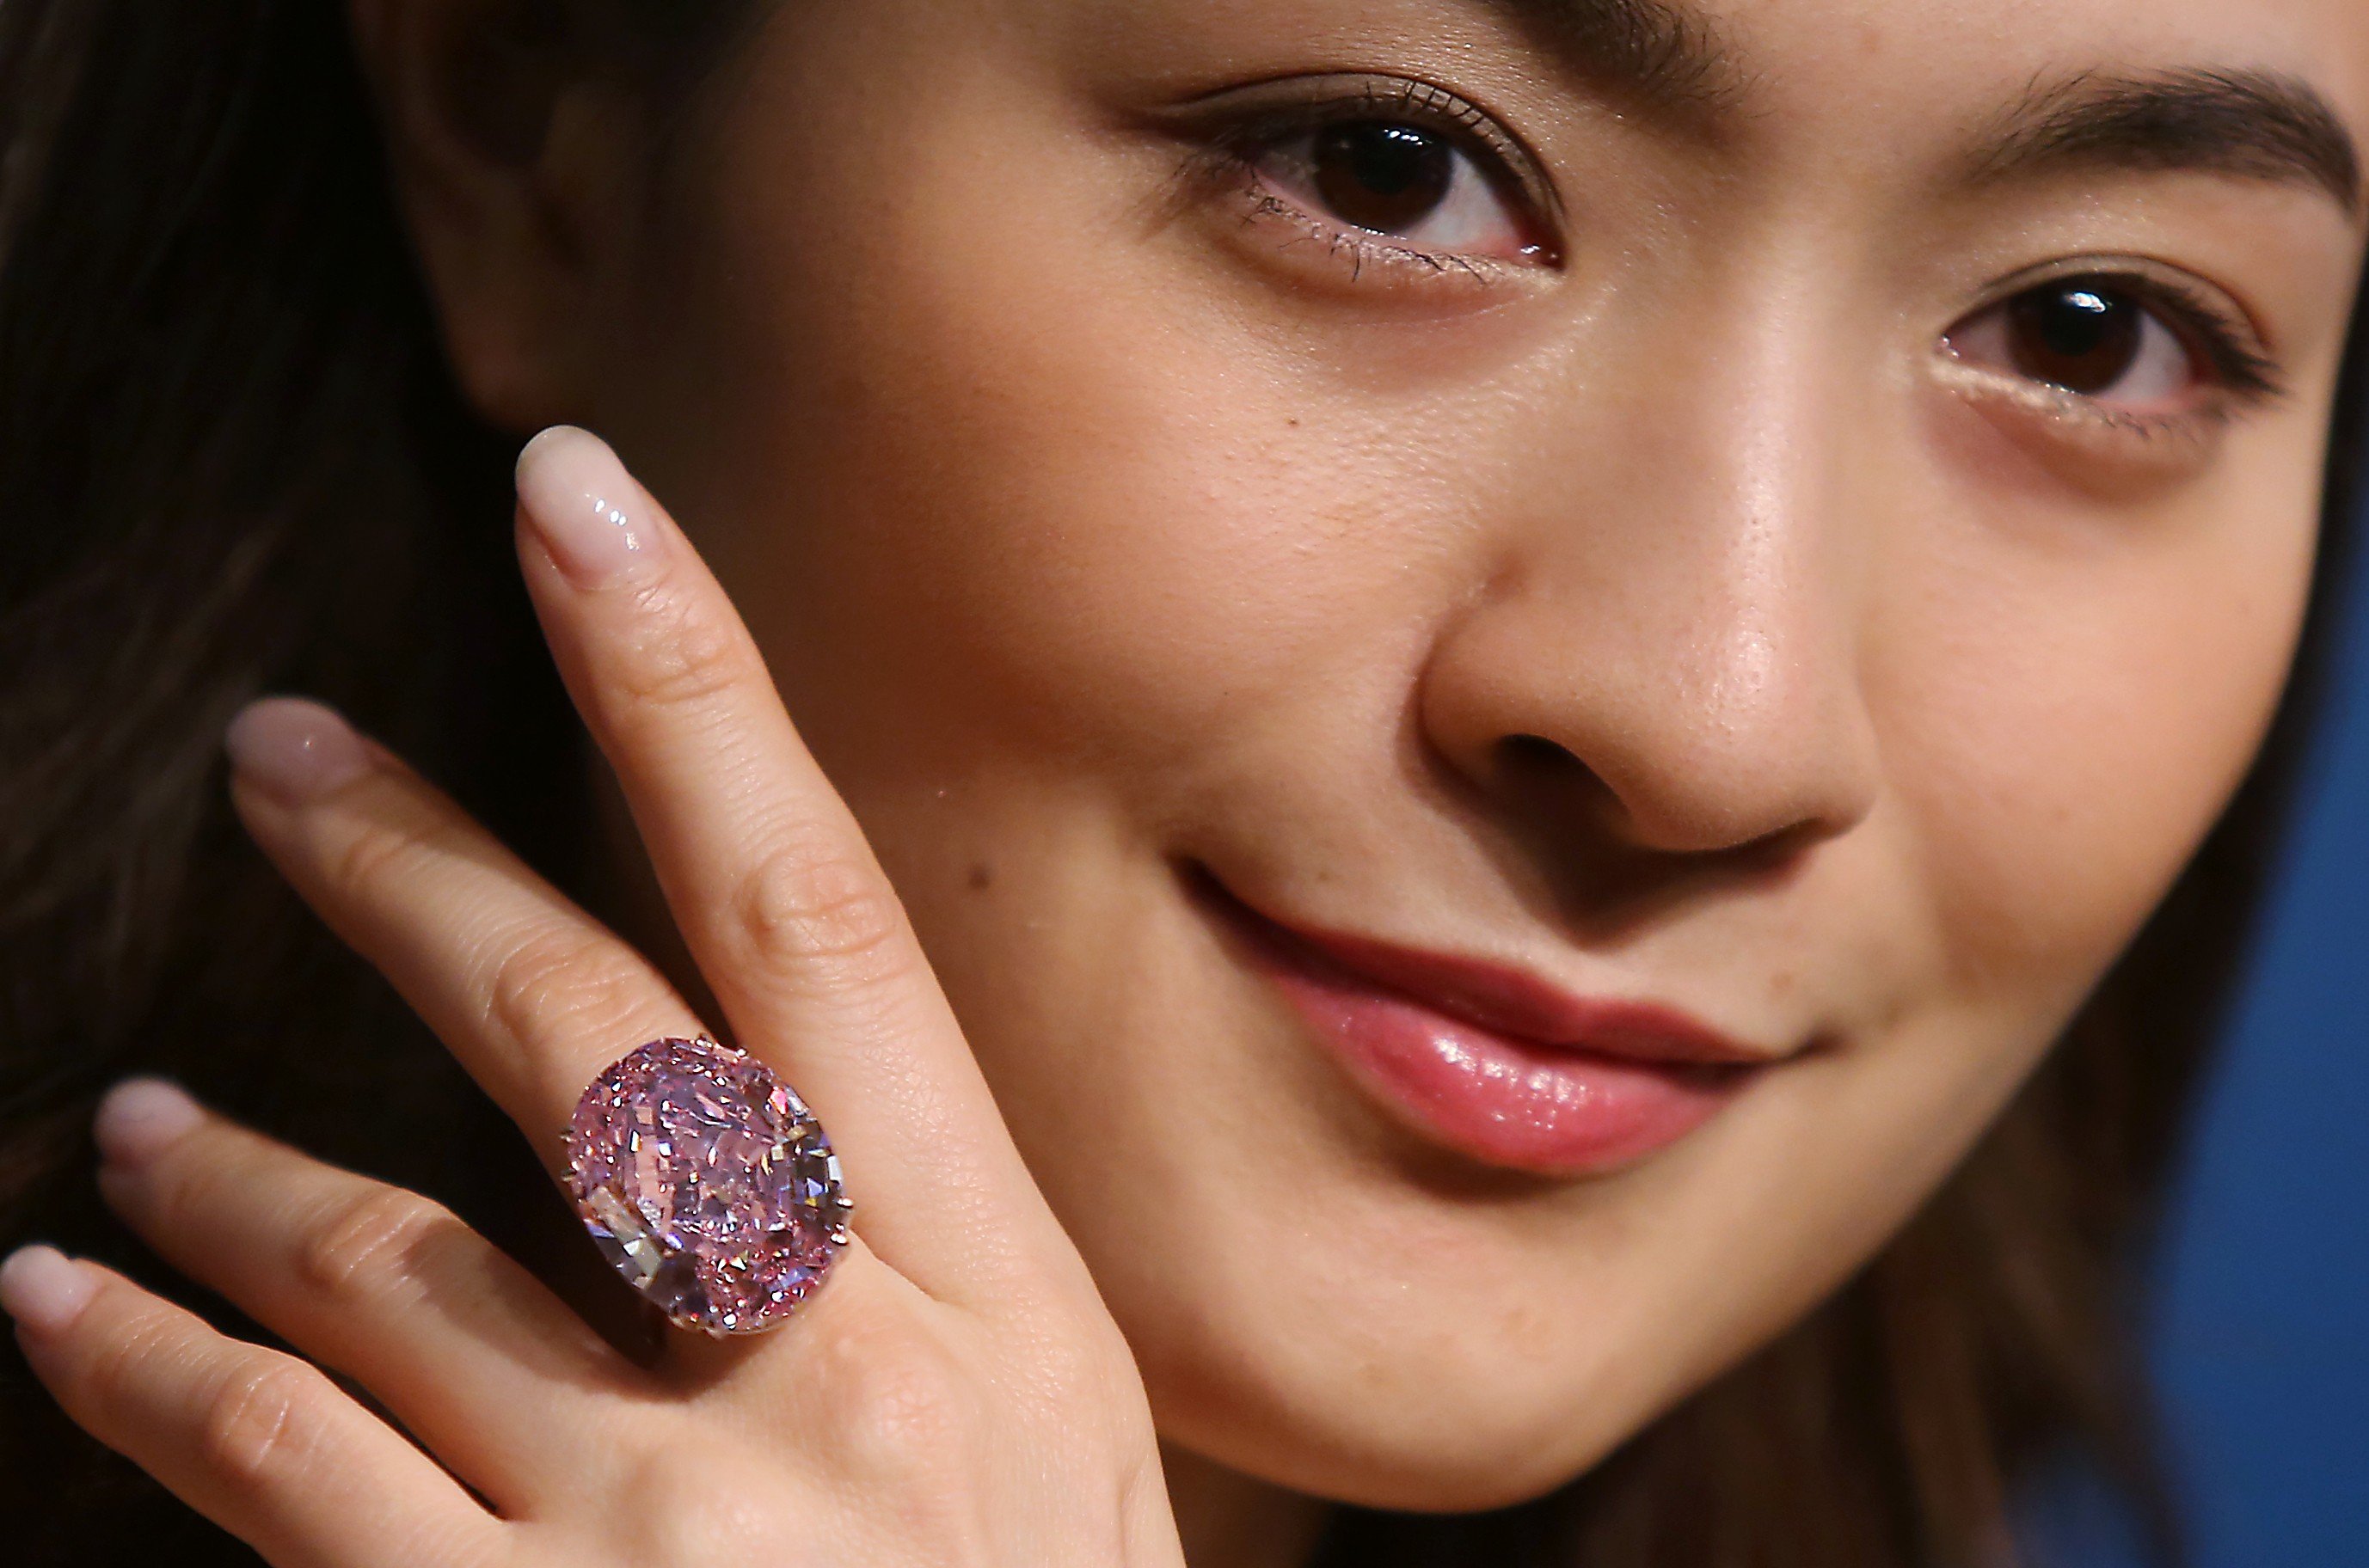 The 59.6ct Pink Star diamond, which was sold in April for a record US$71.2 million at auction by Sotheby's Hong Kong. Photo: Chen Xiaomei